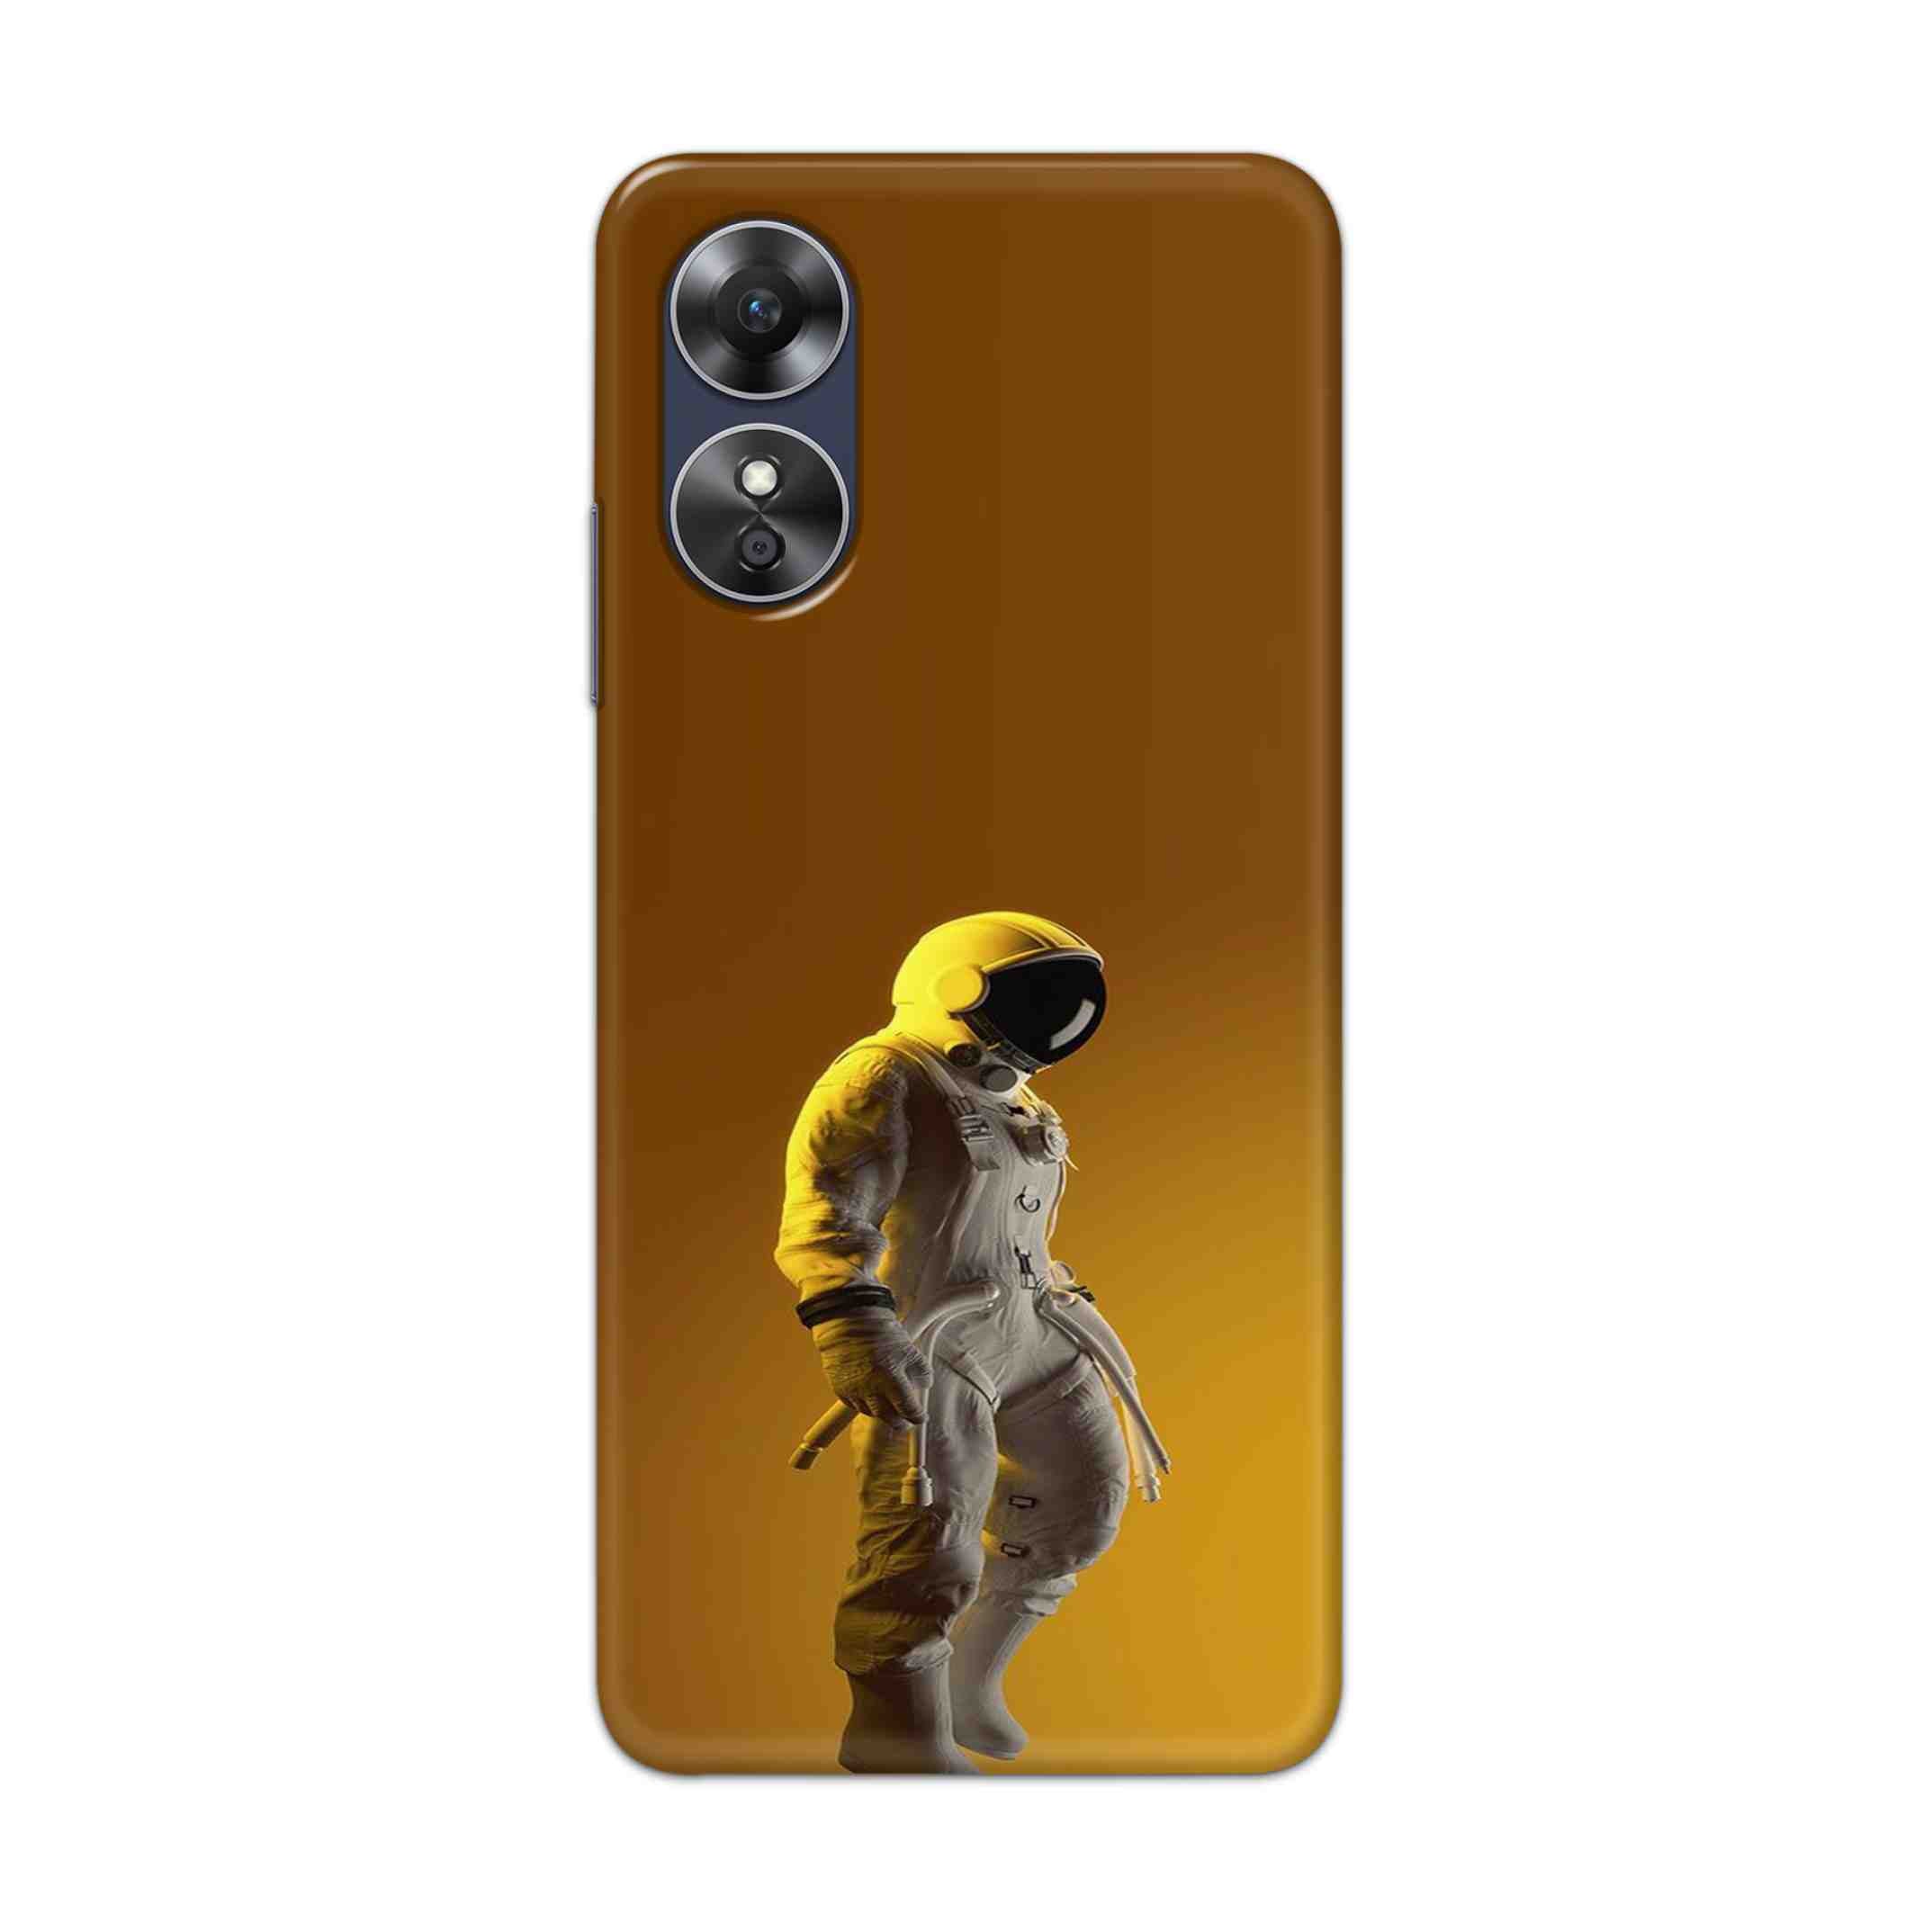 Buy Yellow Astronaut Hard Back Mobile Phone Case Cover For Oppo A17 Online